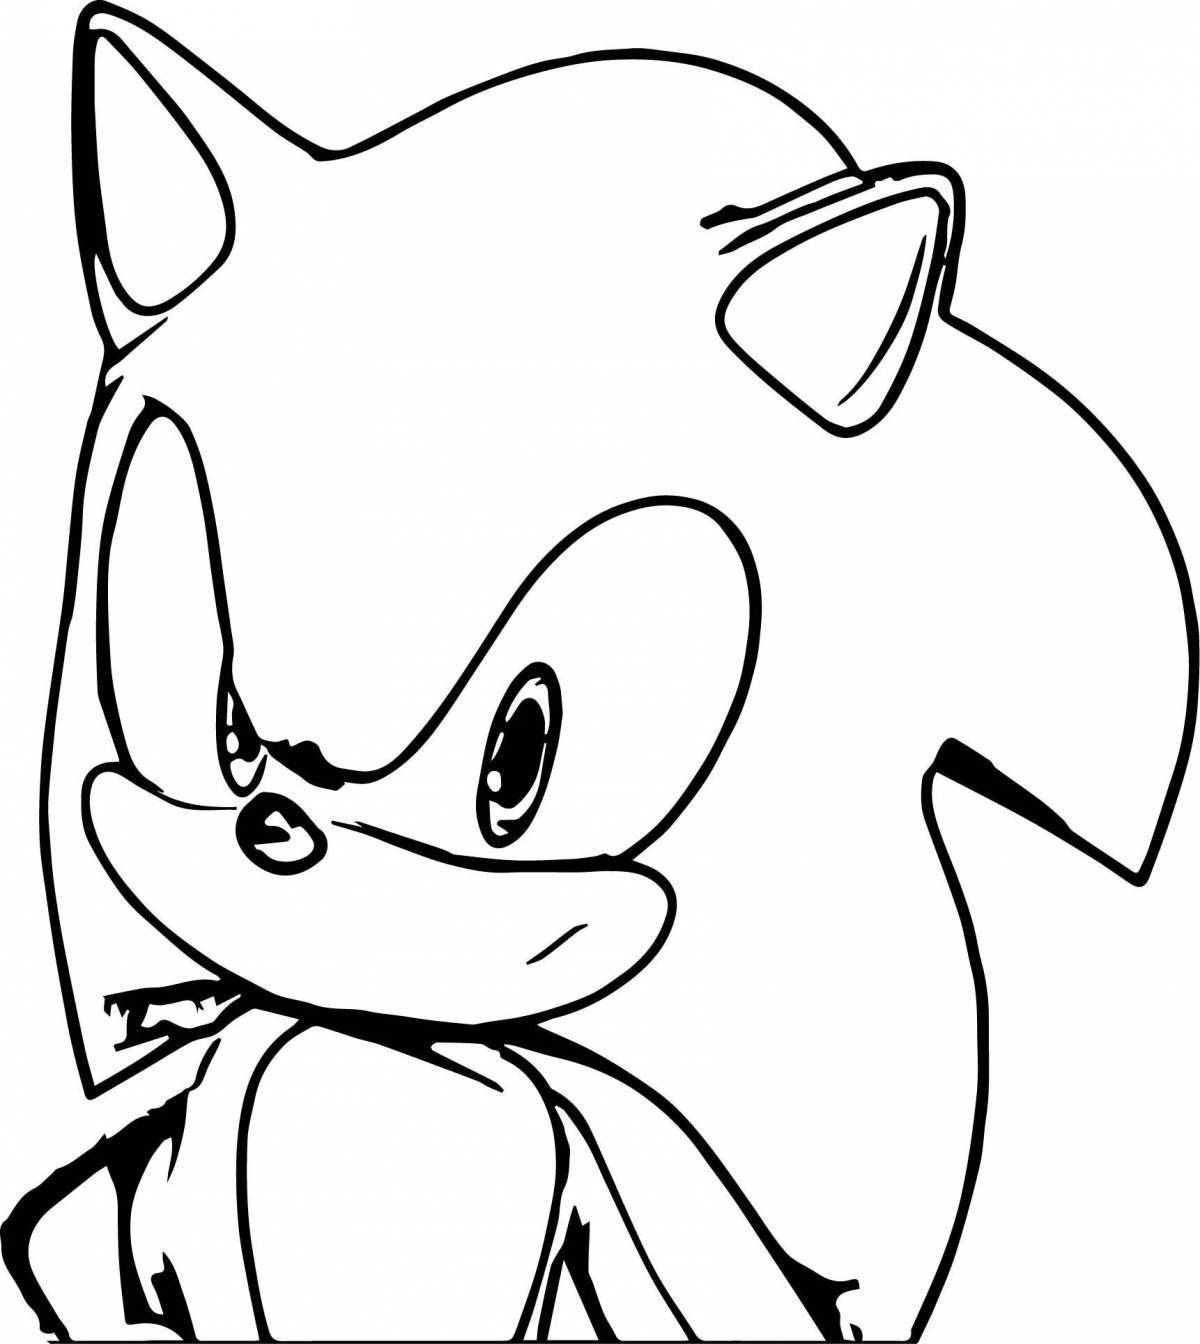 Humorous sonic exe coloring book for kids